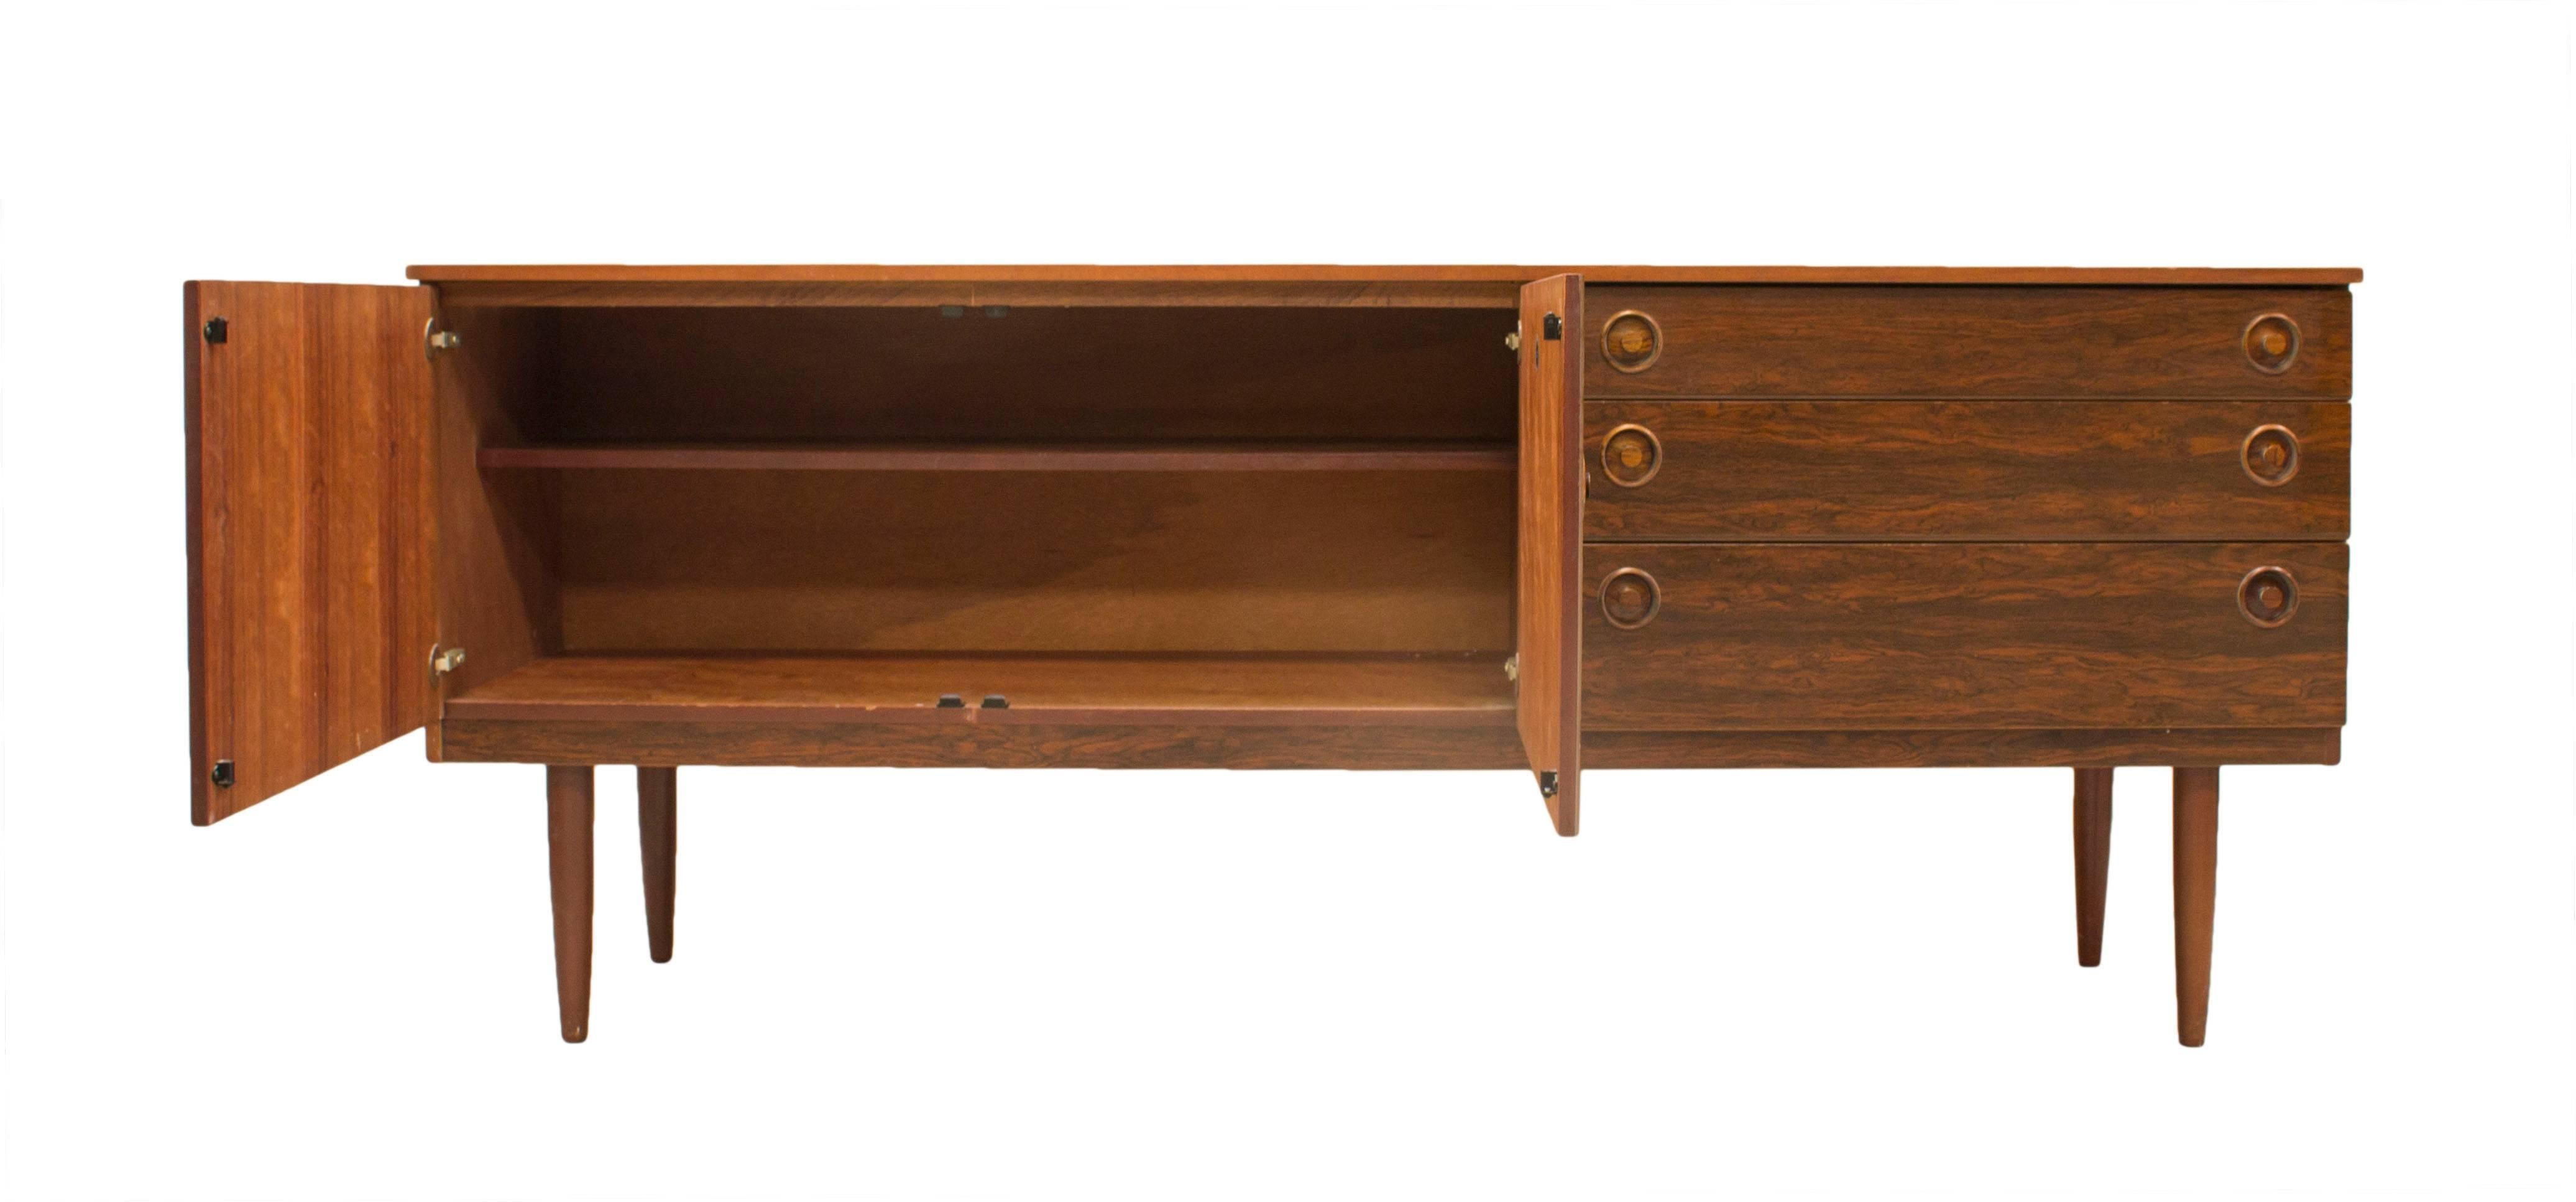 Greaves & Thomas are renowned for their innovative and stunning designs and this Mahogany sideboard with its intricate rosewood pulls is a wonderful example of how they brought exotic materials together to create stylish and highly practical